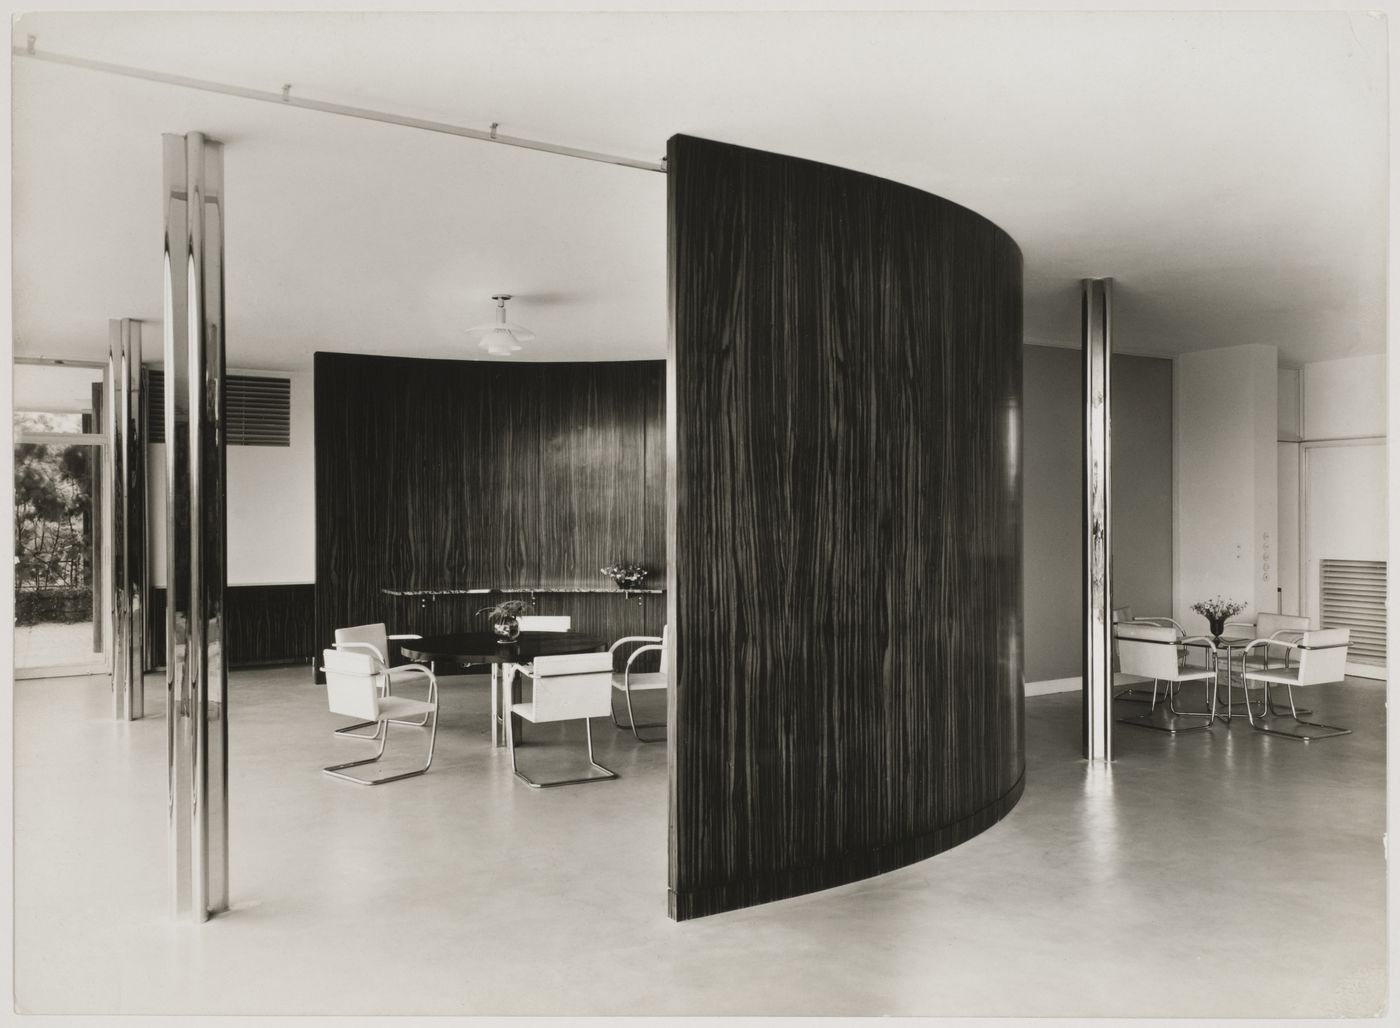 Interior view of Tugendhat House showing the dining alcoves separated by a semicircular partition wall and furniture designed by Mies van der Rohe, Brno, Czechoslovakia (Czech Republic)